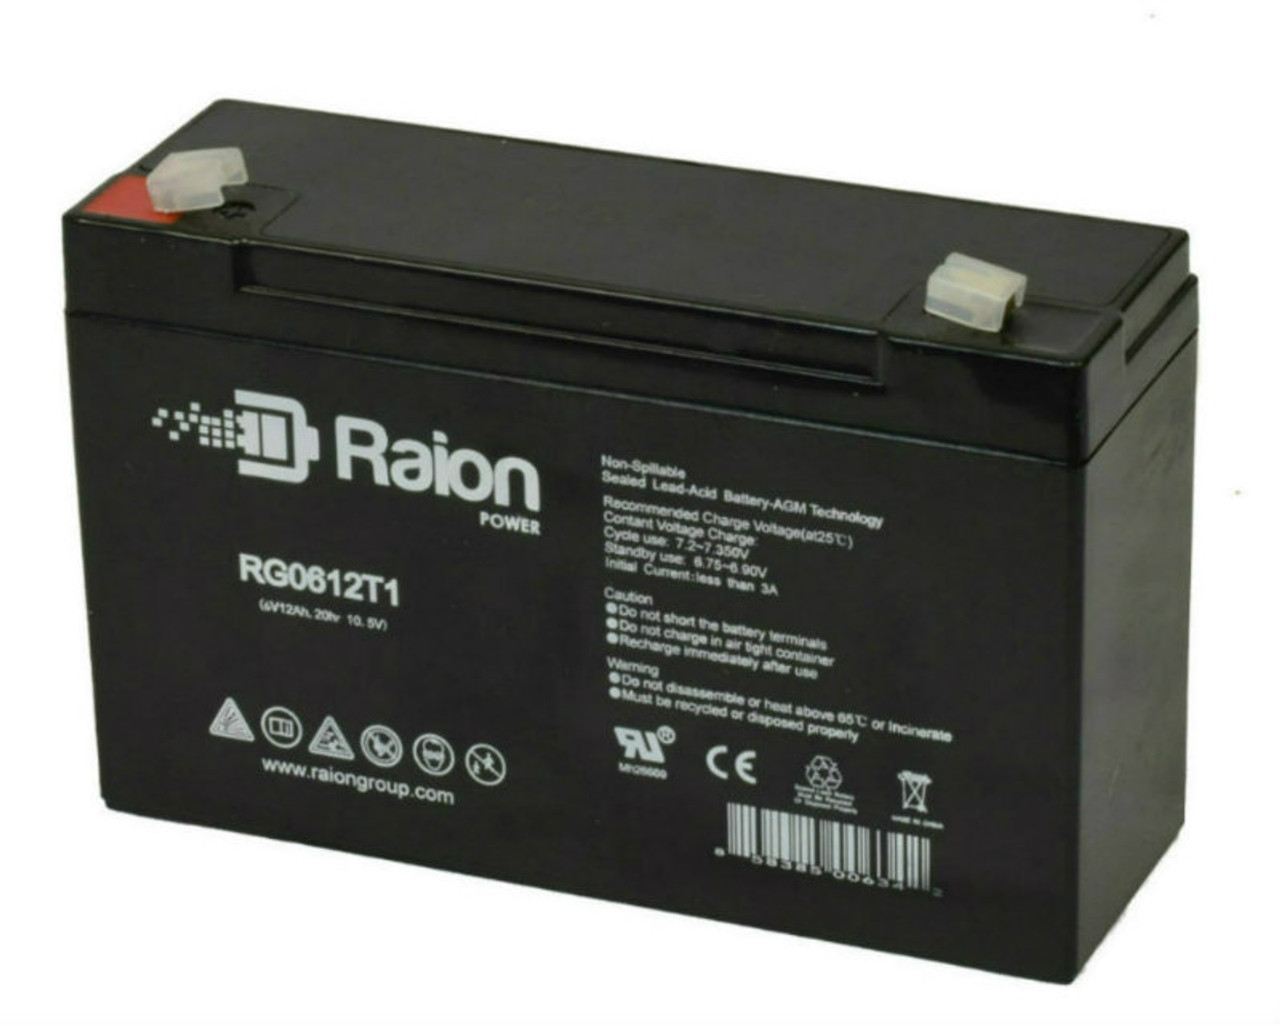 Raion Power RG06120T1 Replacement 6V 12Ah Emergency Light Battery for Siltron PEA6V8